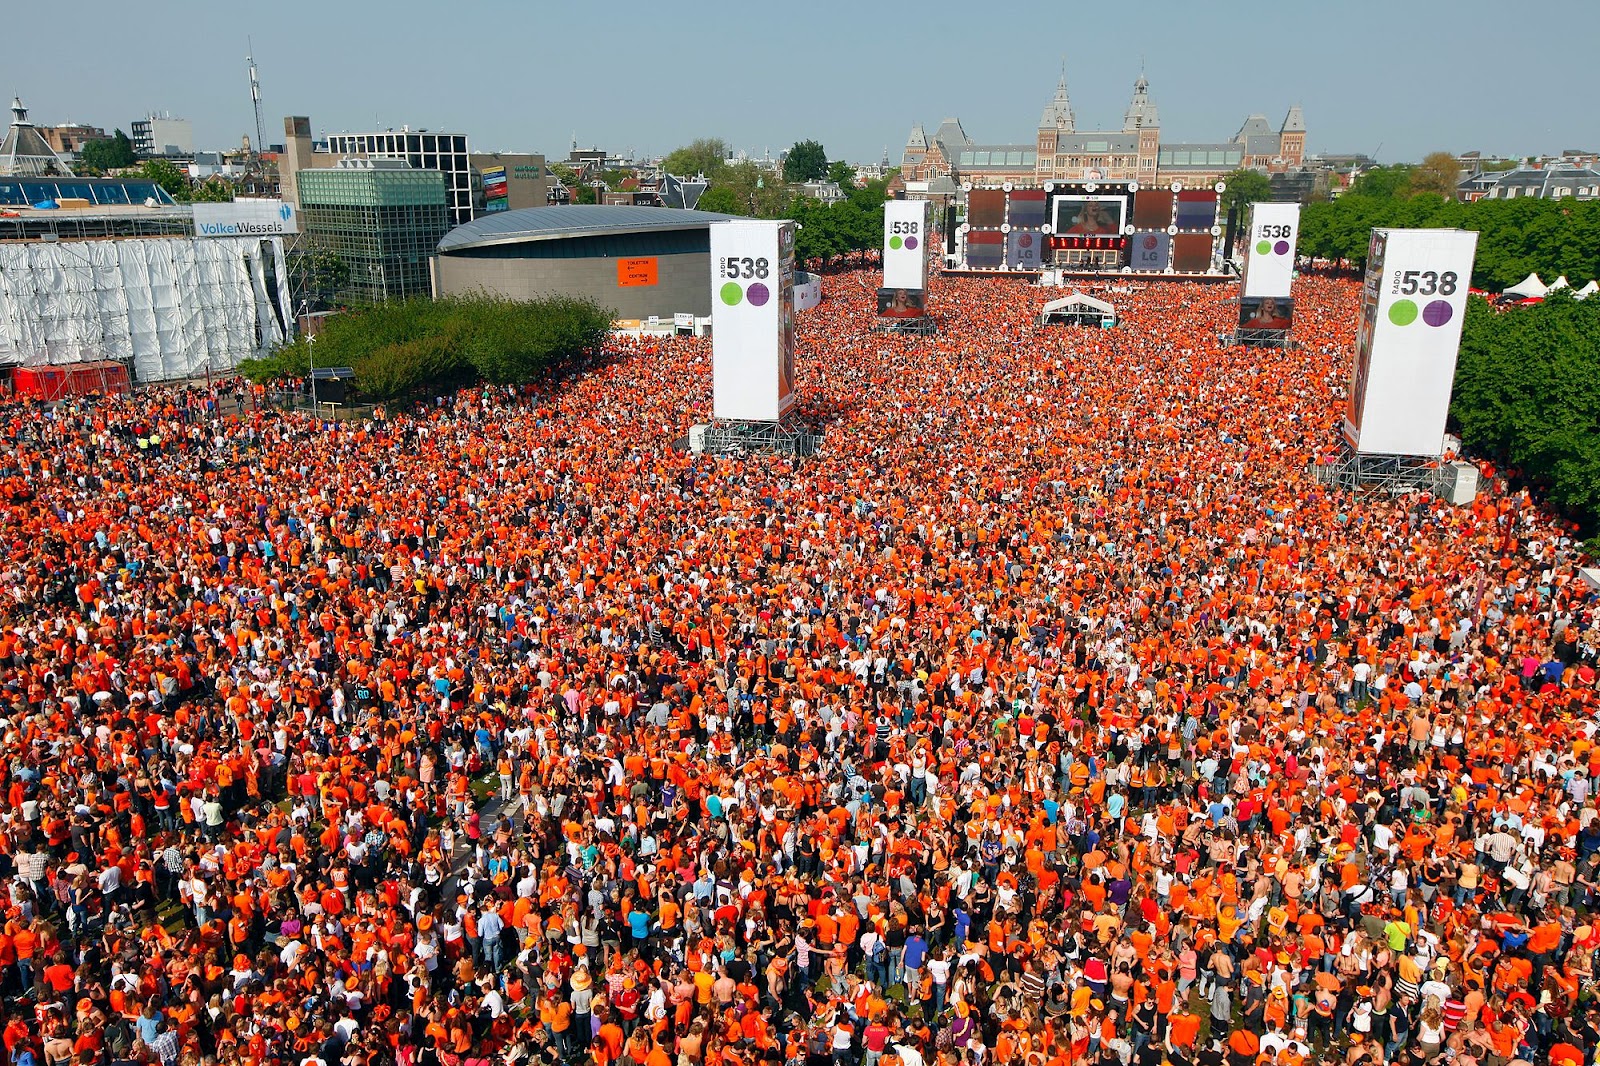 Queen’s Day in Holland join our orange party! Meet Mr. Holland Blog